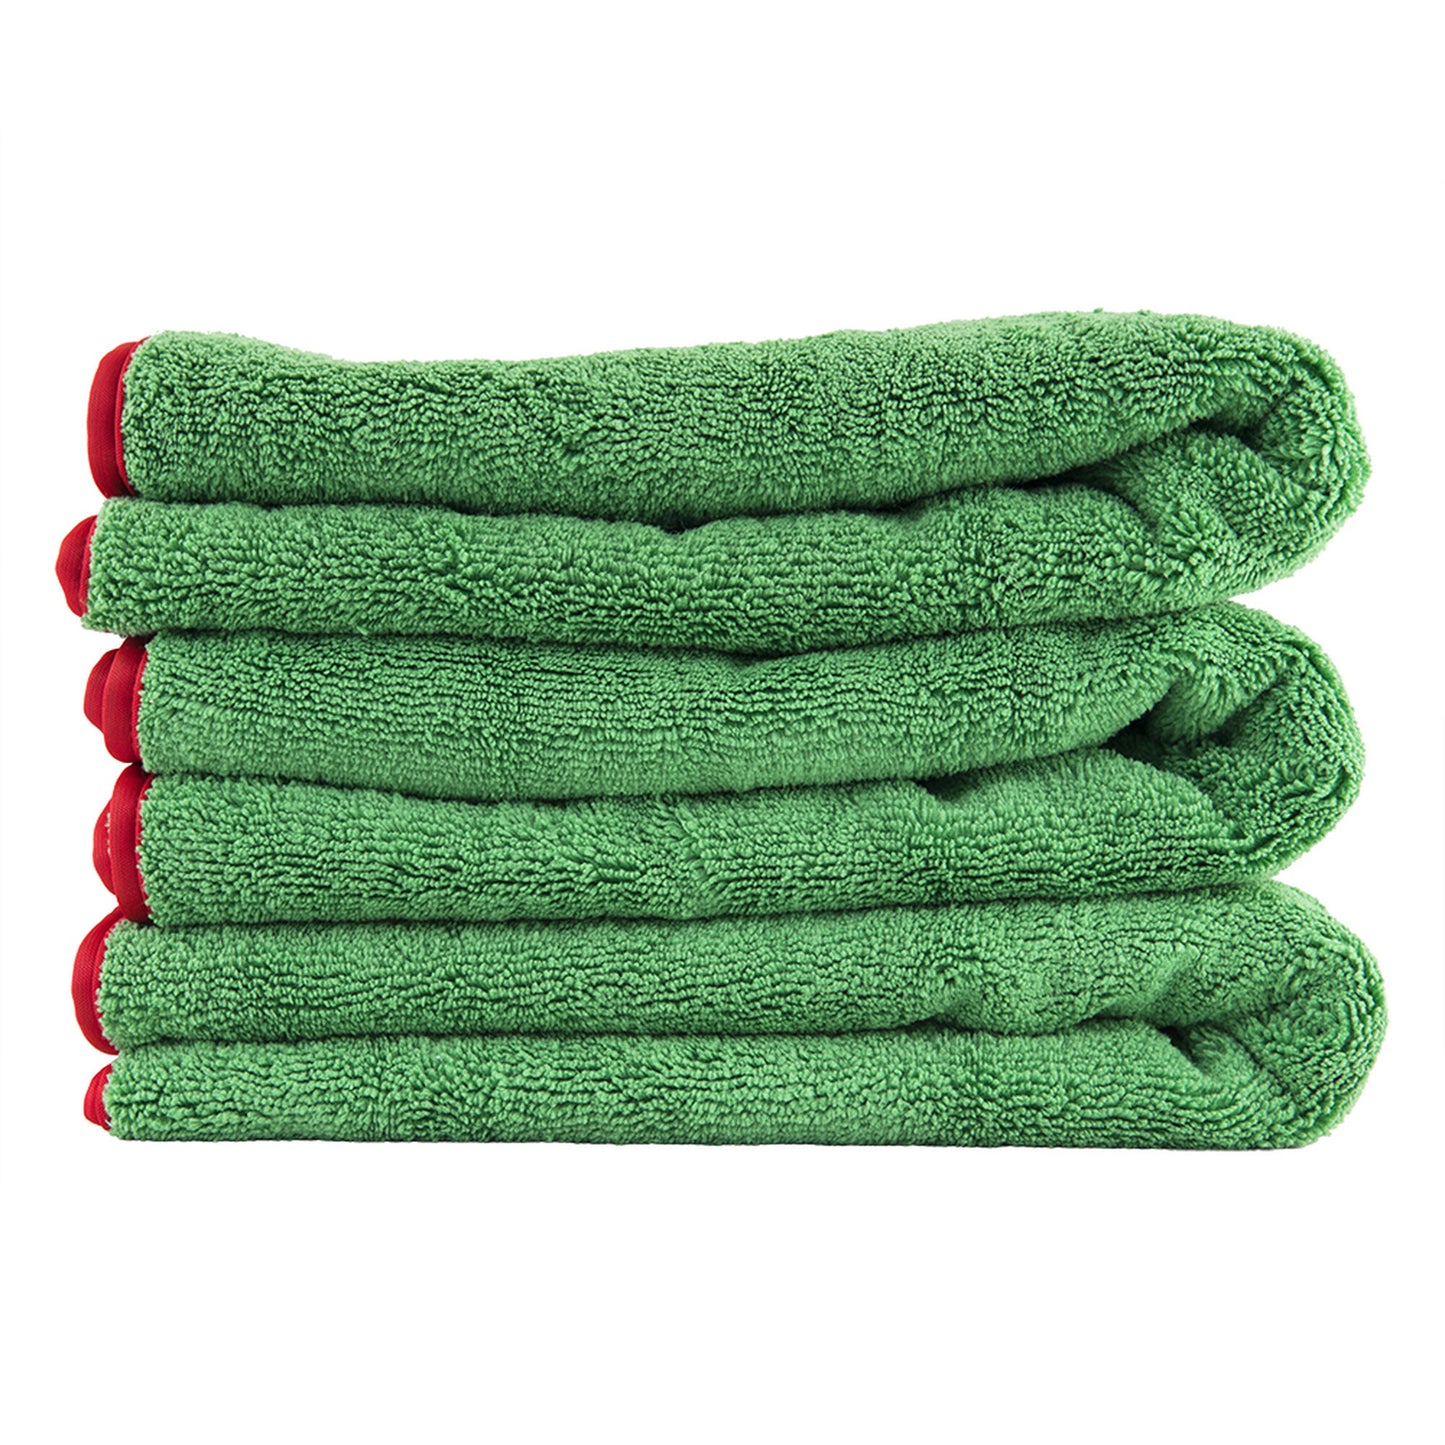 Fluffer Miracle Green Towel w/ Banded Red Edges 3 Pack